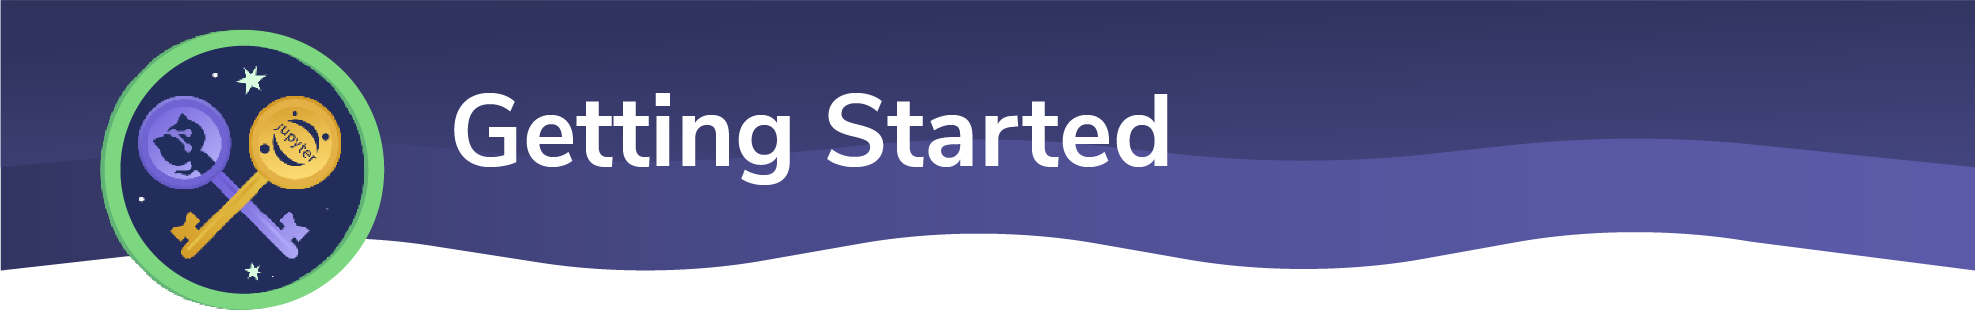 Computing for AI Getting started banner